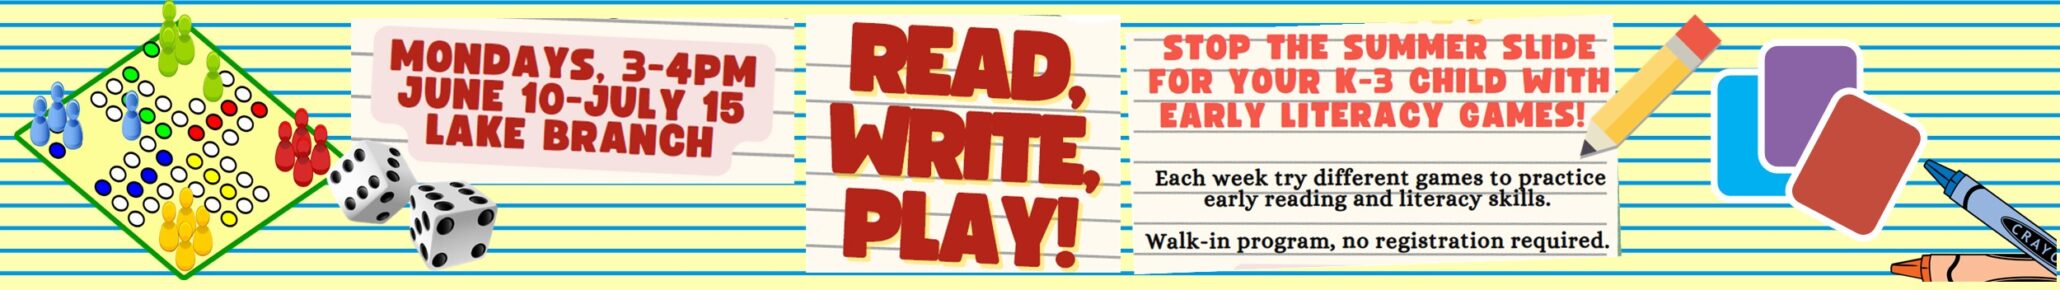 read write play at the lake branch on mondays for kids in k to 3rd grade